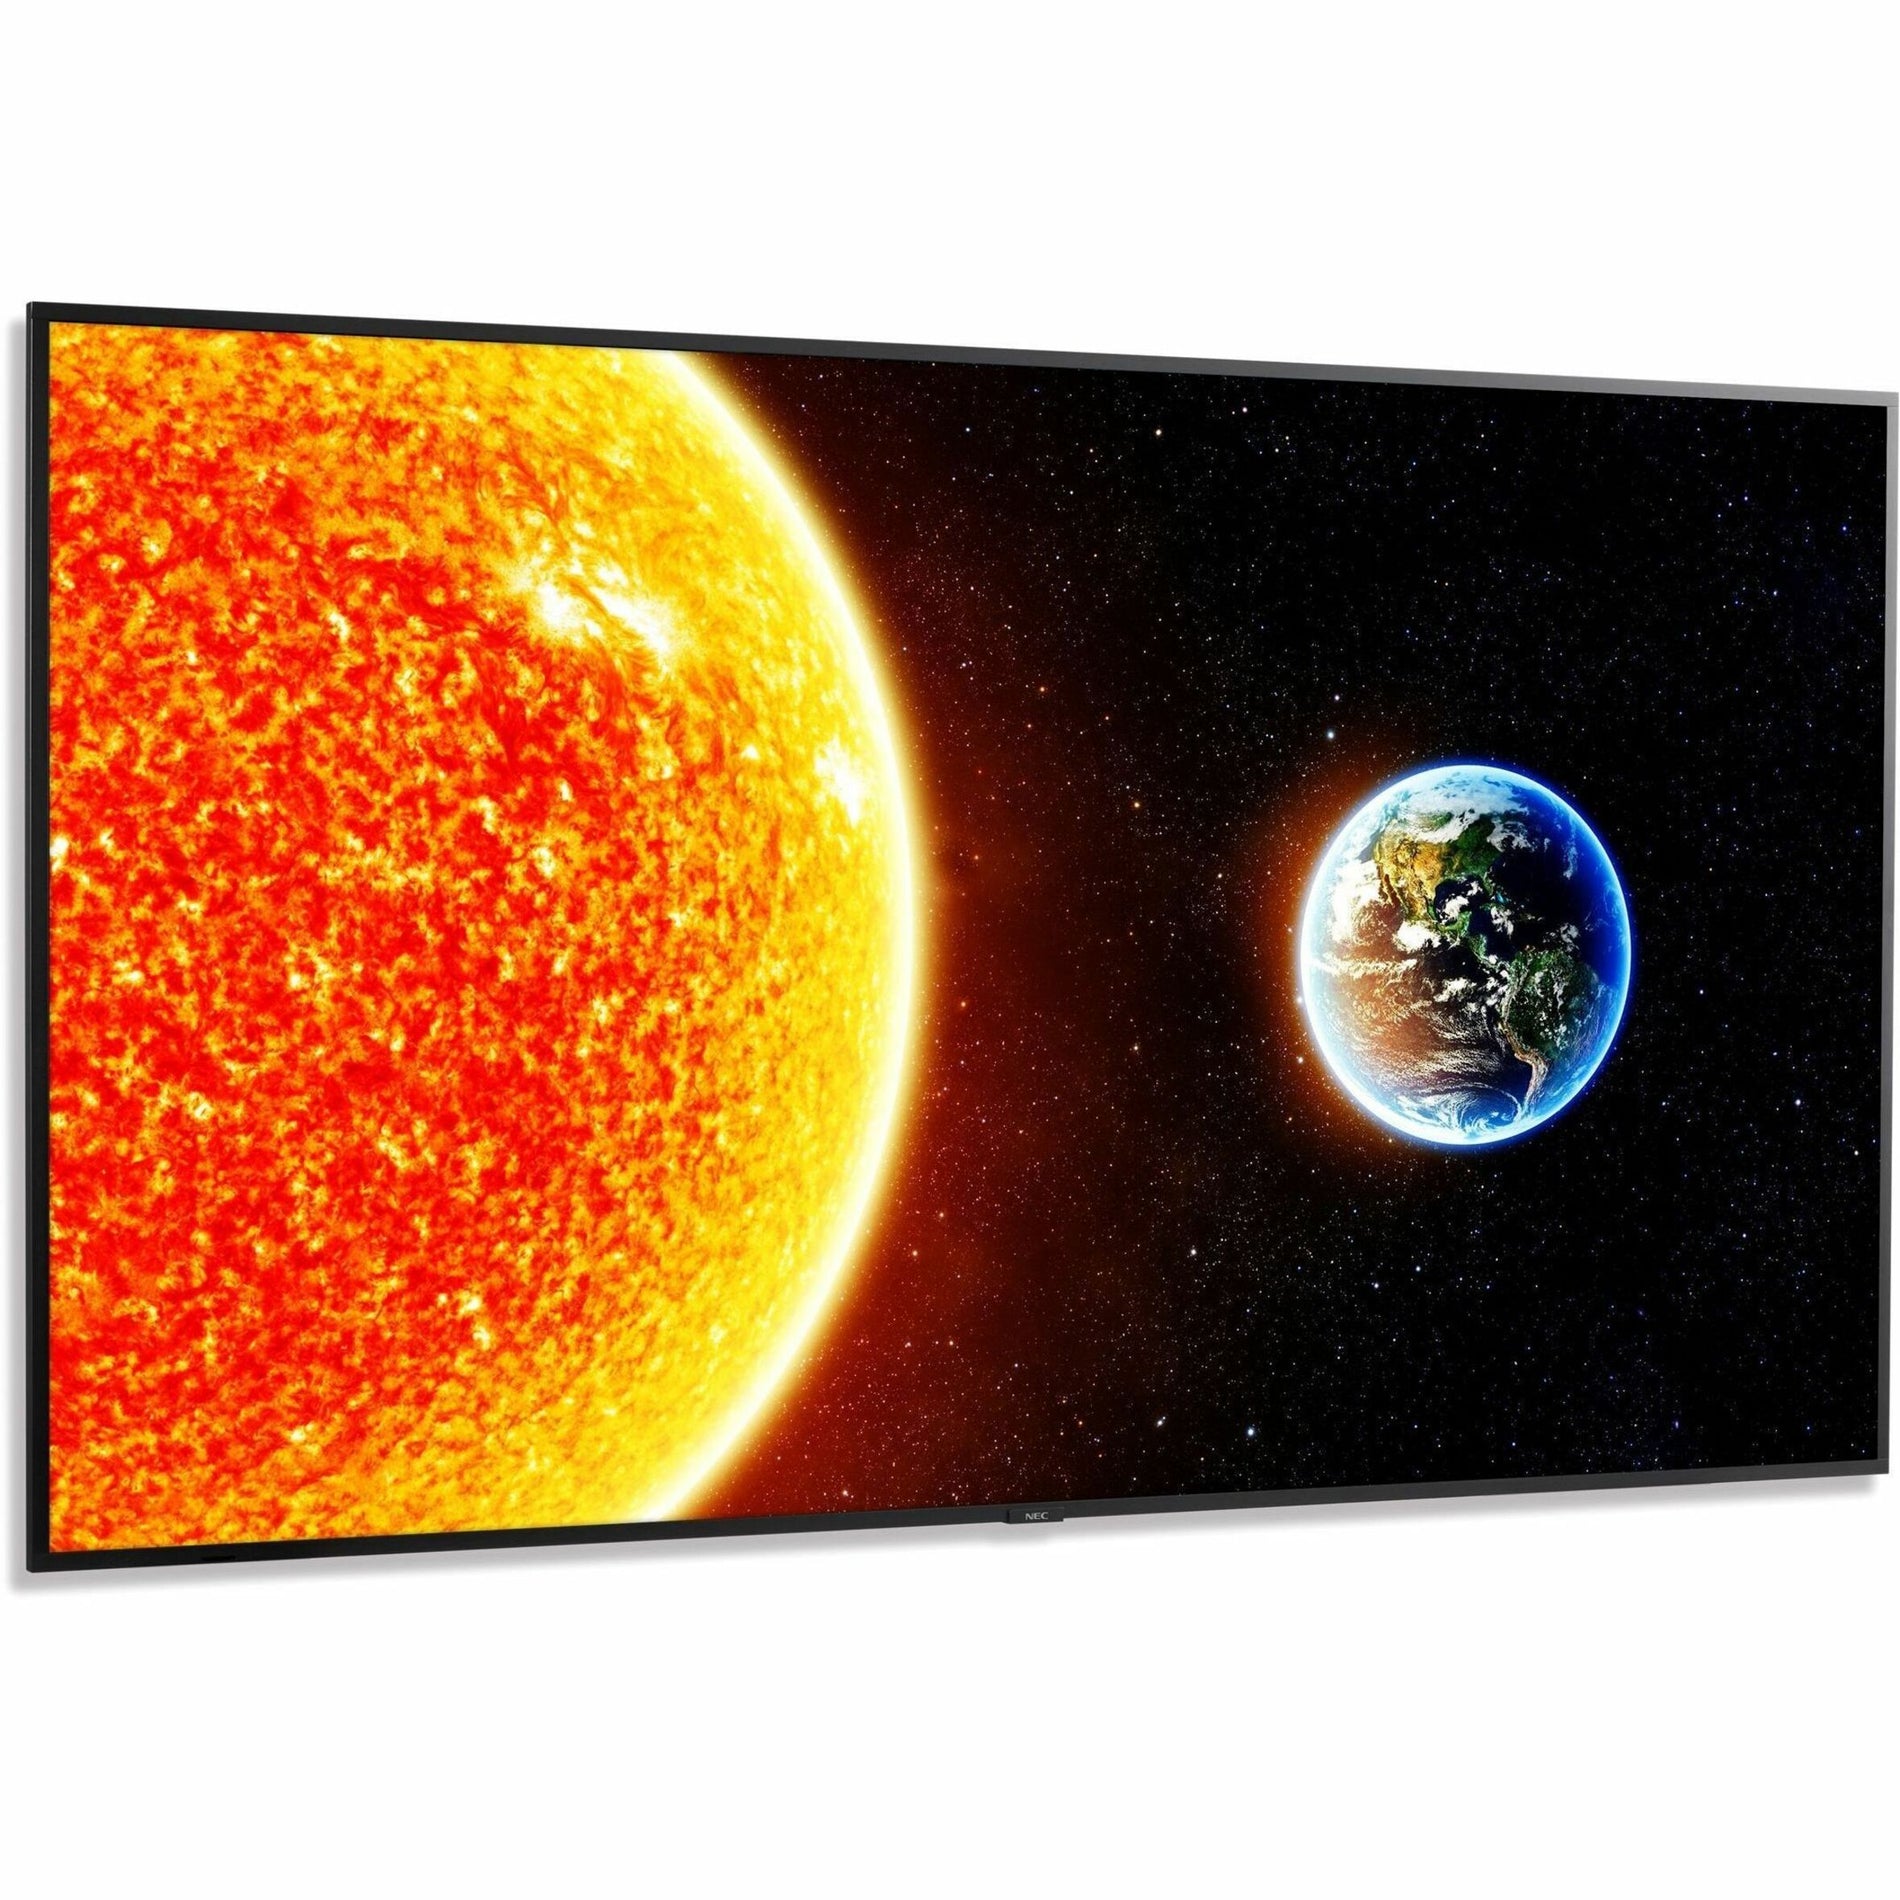 Sharp NEC Display E988 98" Ultra High Definition Commercial Display, 350 Nit, 2160p, 3 Year Warranty